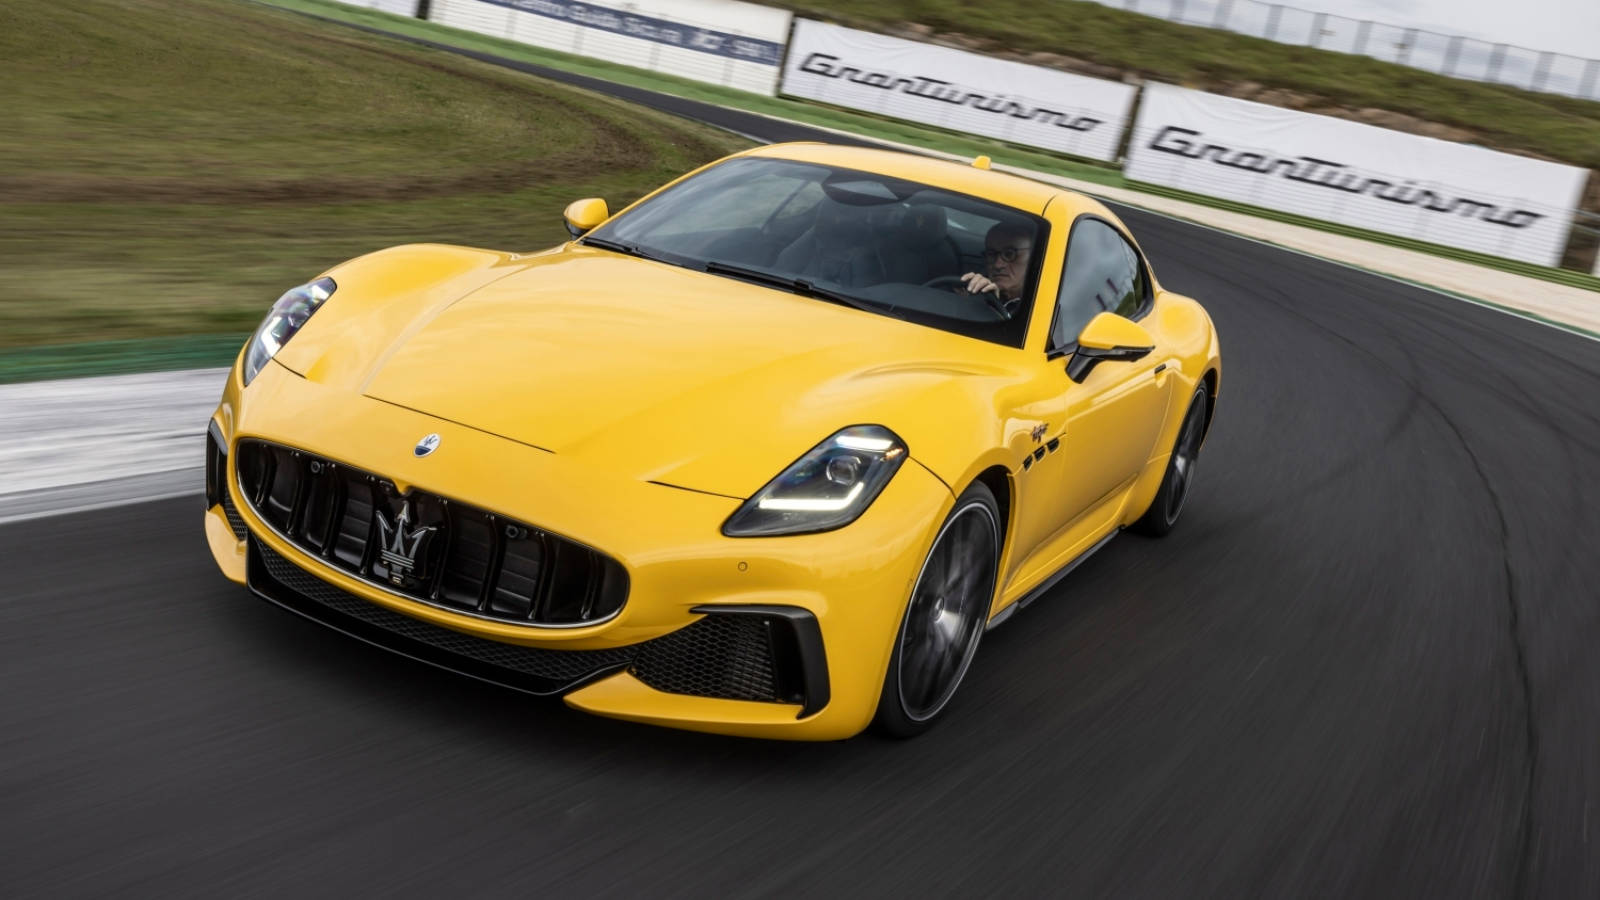 New 2024 Maserati GranTurismo Launched In The UAE: The Italian Coupe Is Back After 5 Years